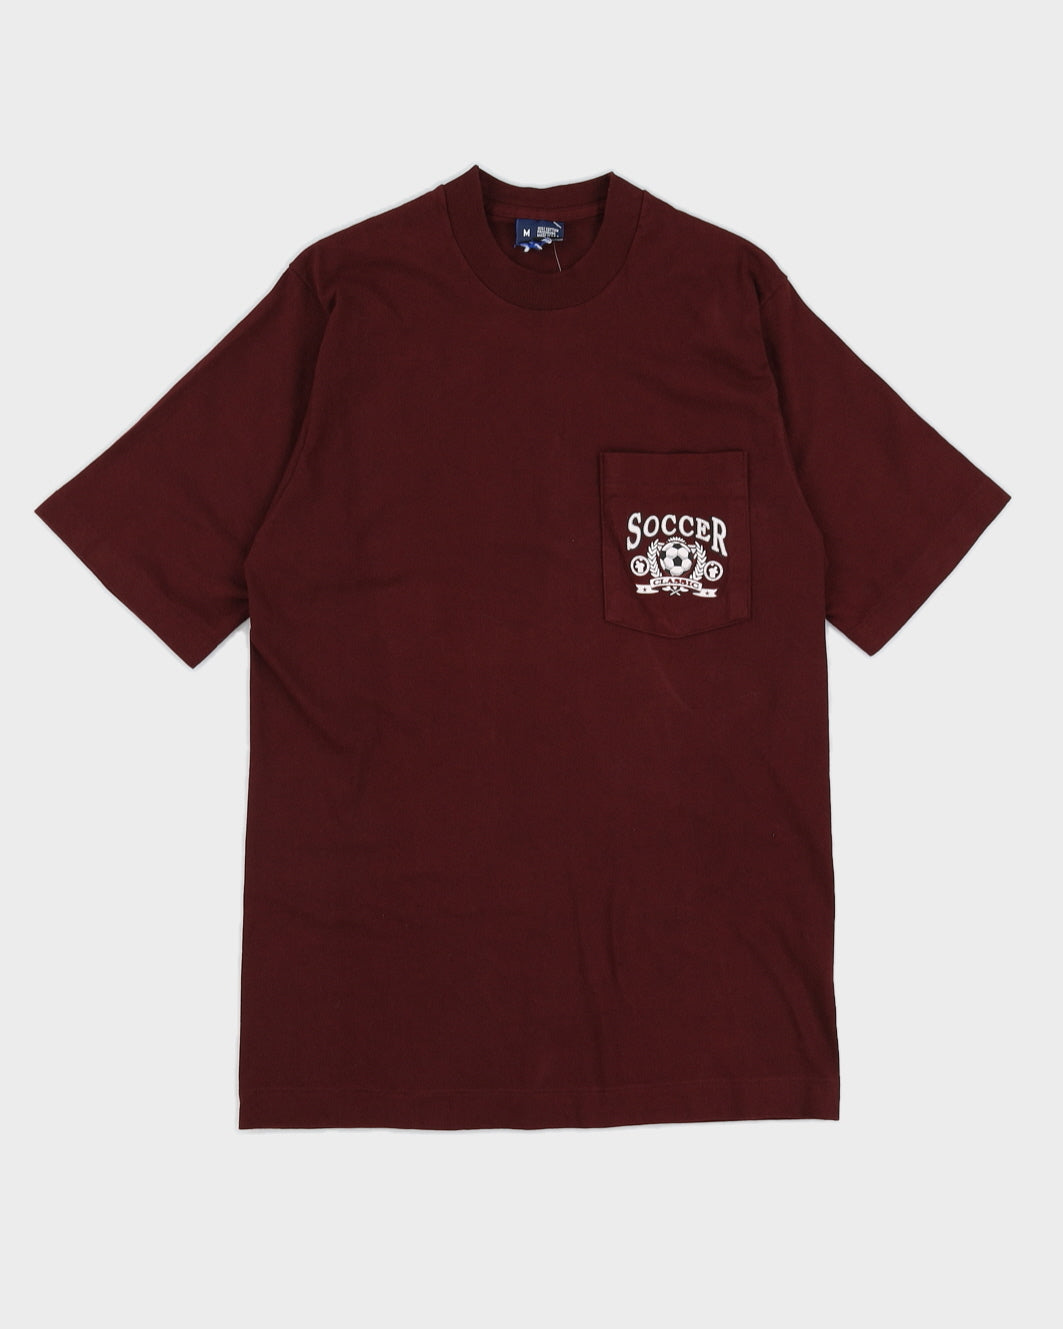 Vintage 90s Soccer Classic Maroon T-Shirt - M